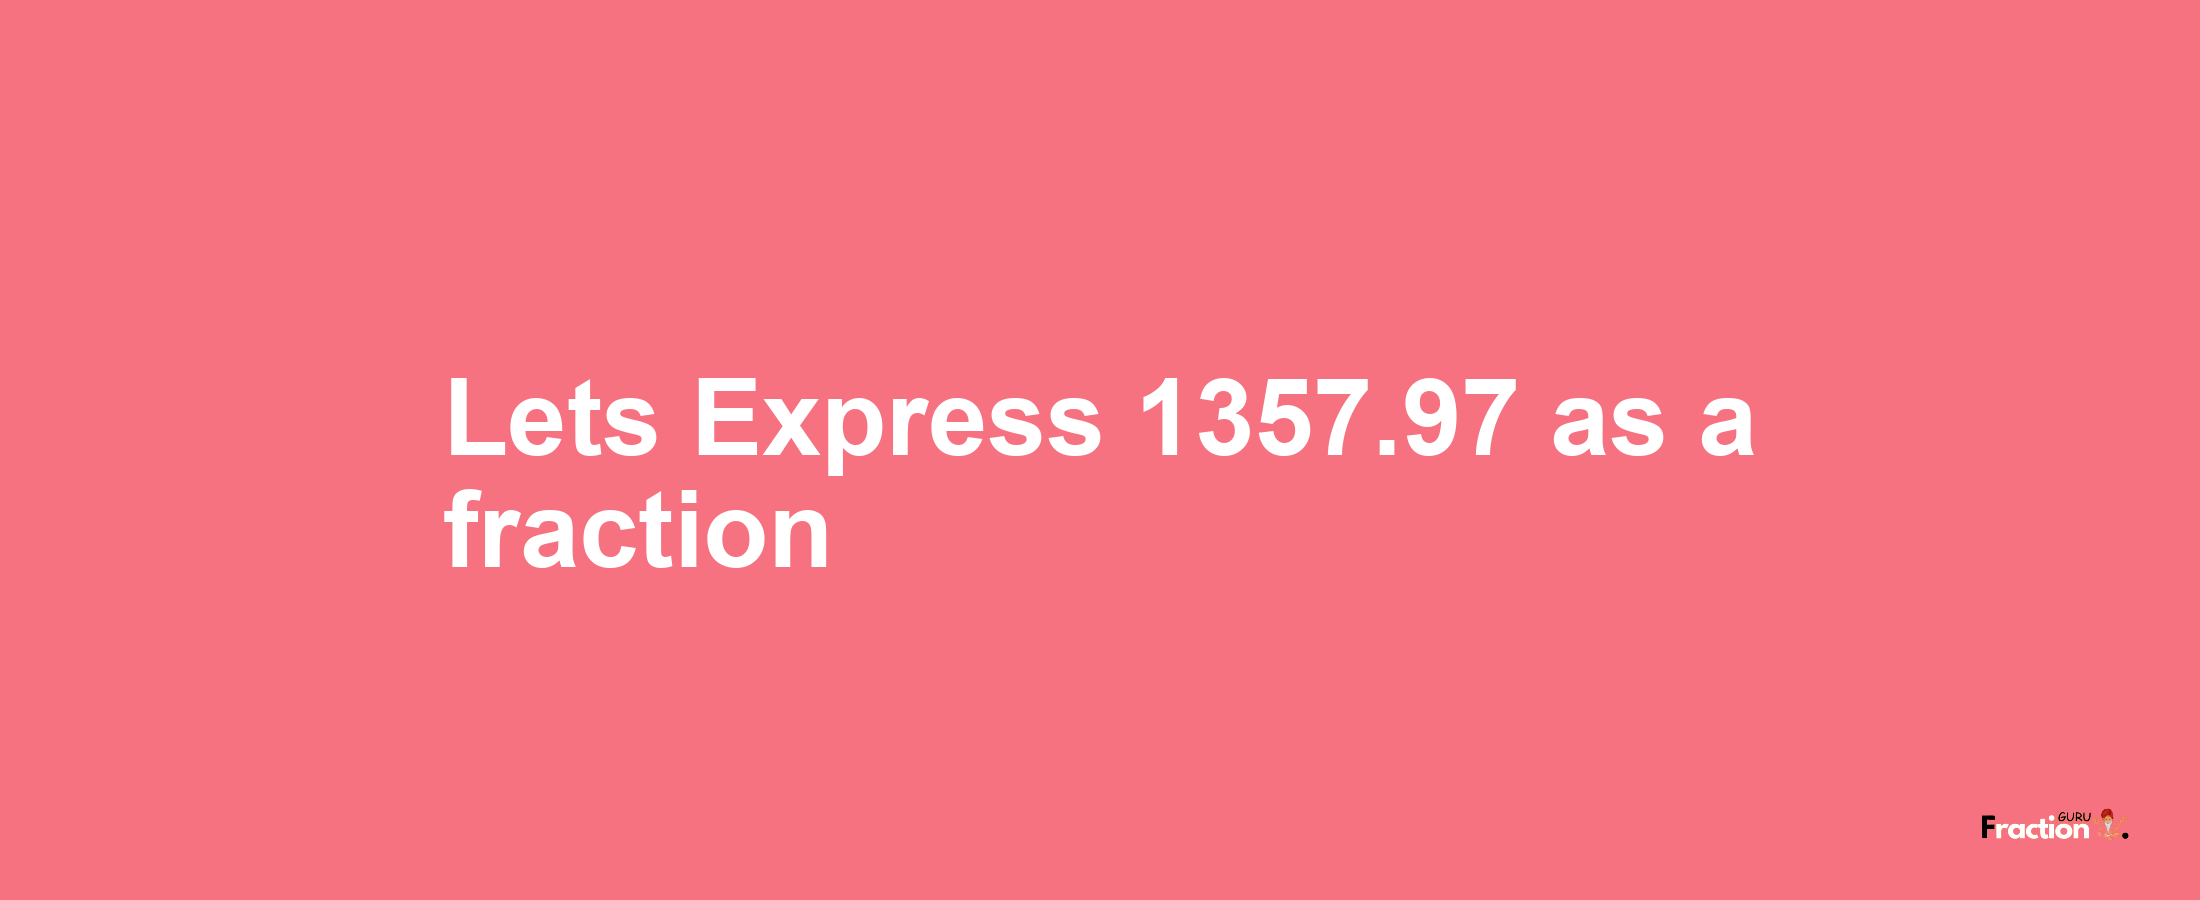 Lets Express 1357.97 as afraction